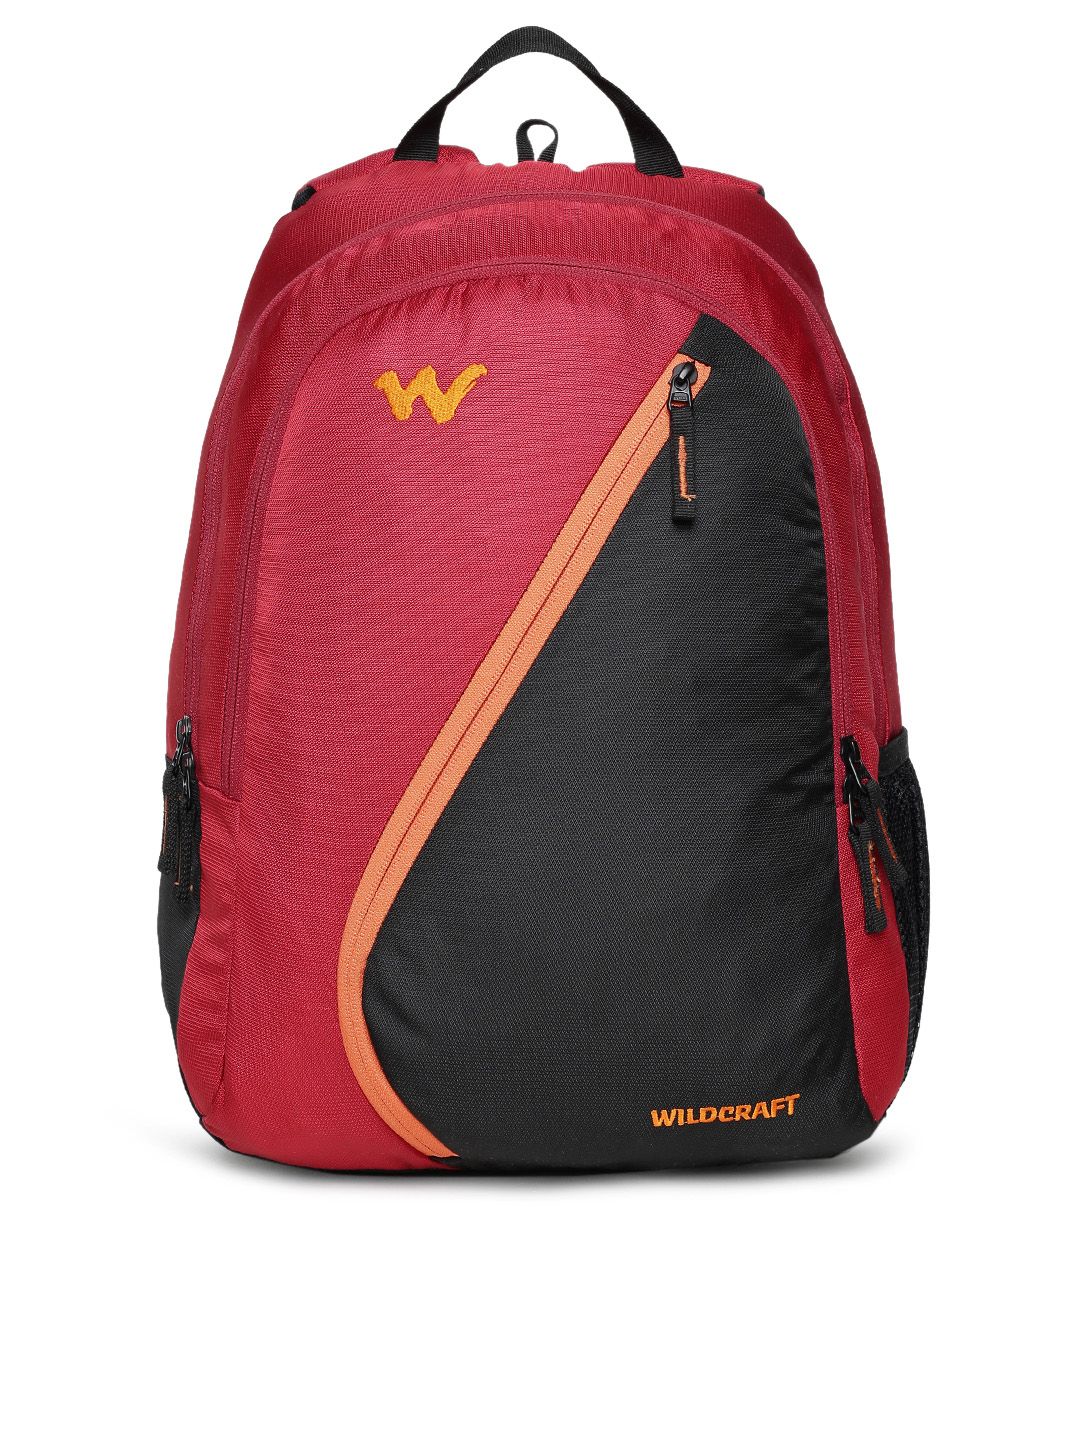 Wildcraft Unisex Red & Black Colourblocked Backpack Price in India